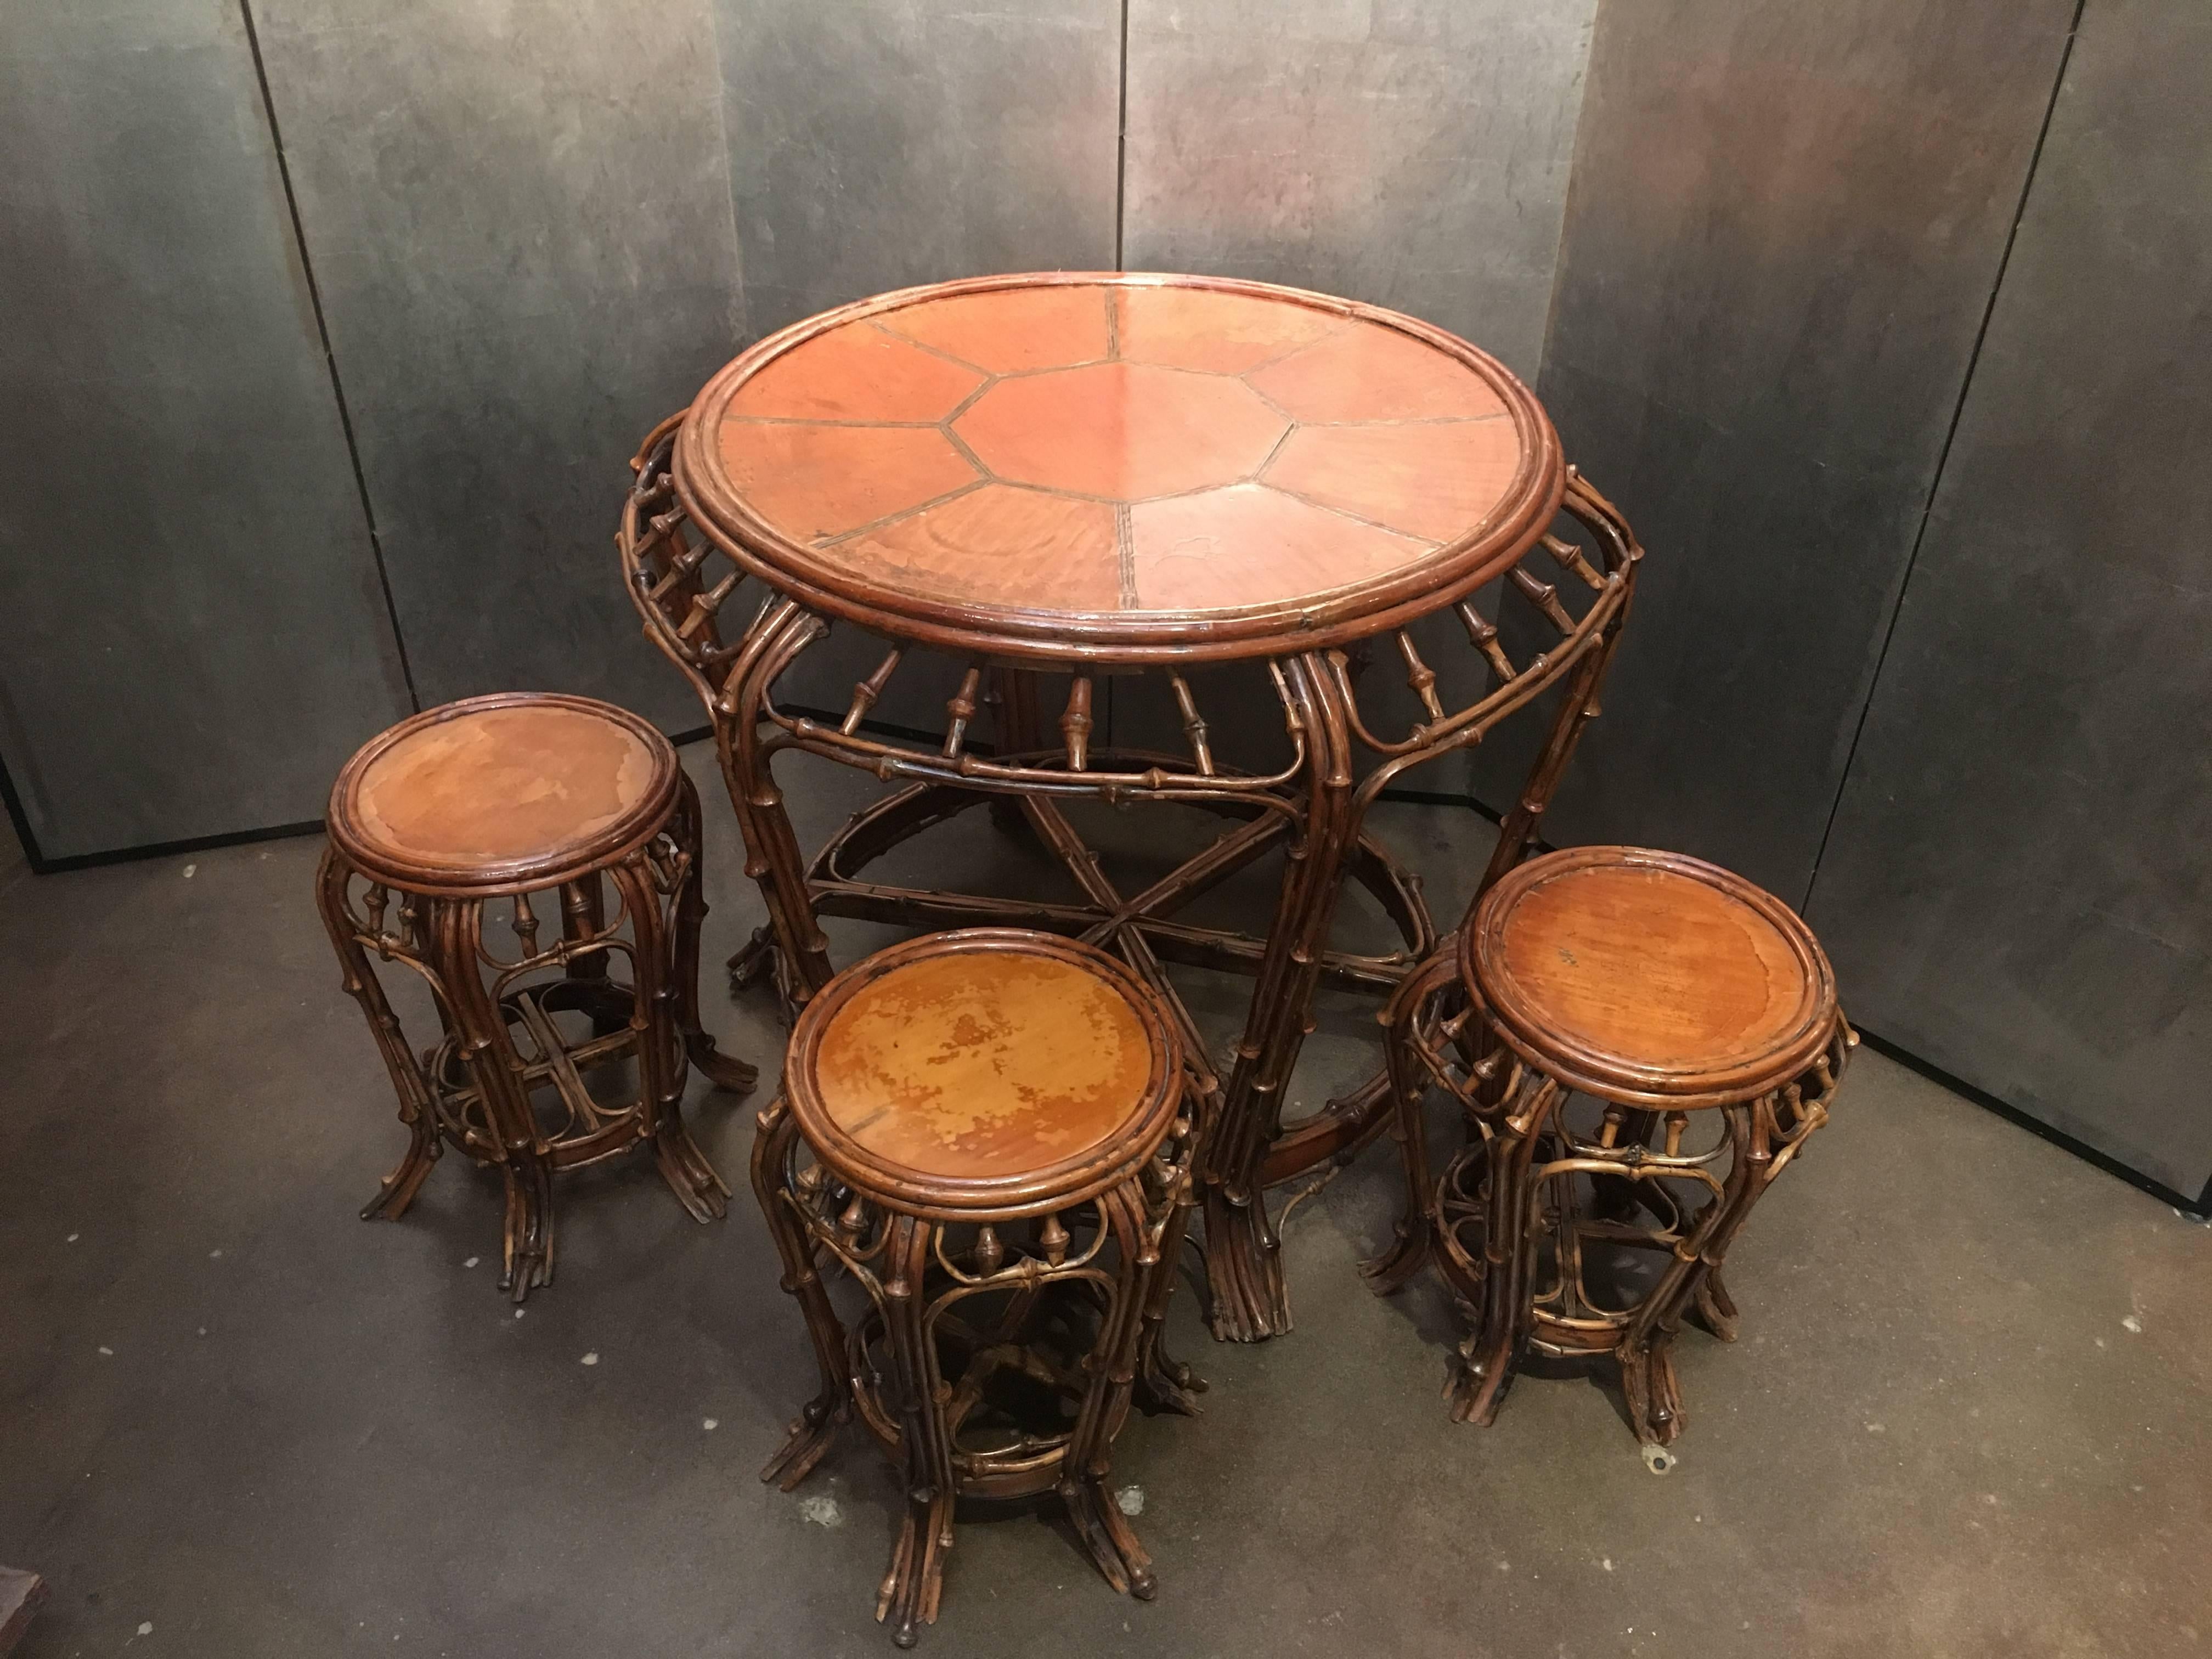 A stunningly elegant 19th century Chinese bent bamboo table with three stools. The body and legs of the table comprised of bent stalks of knobby bamboo. The circular top crafted from large sections of flattened bamboo. The stools fashioned in the